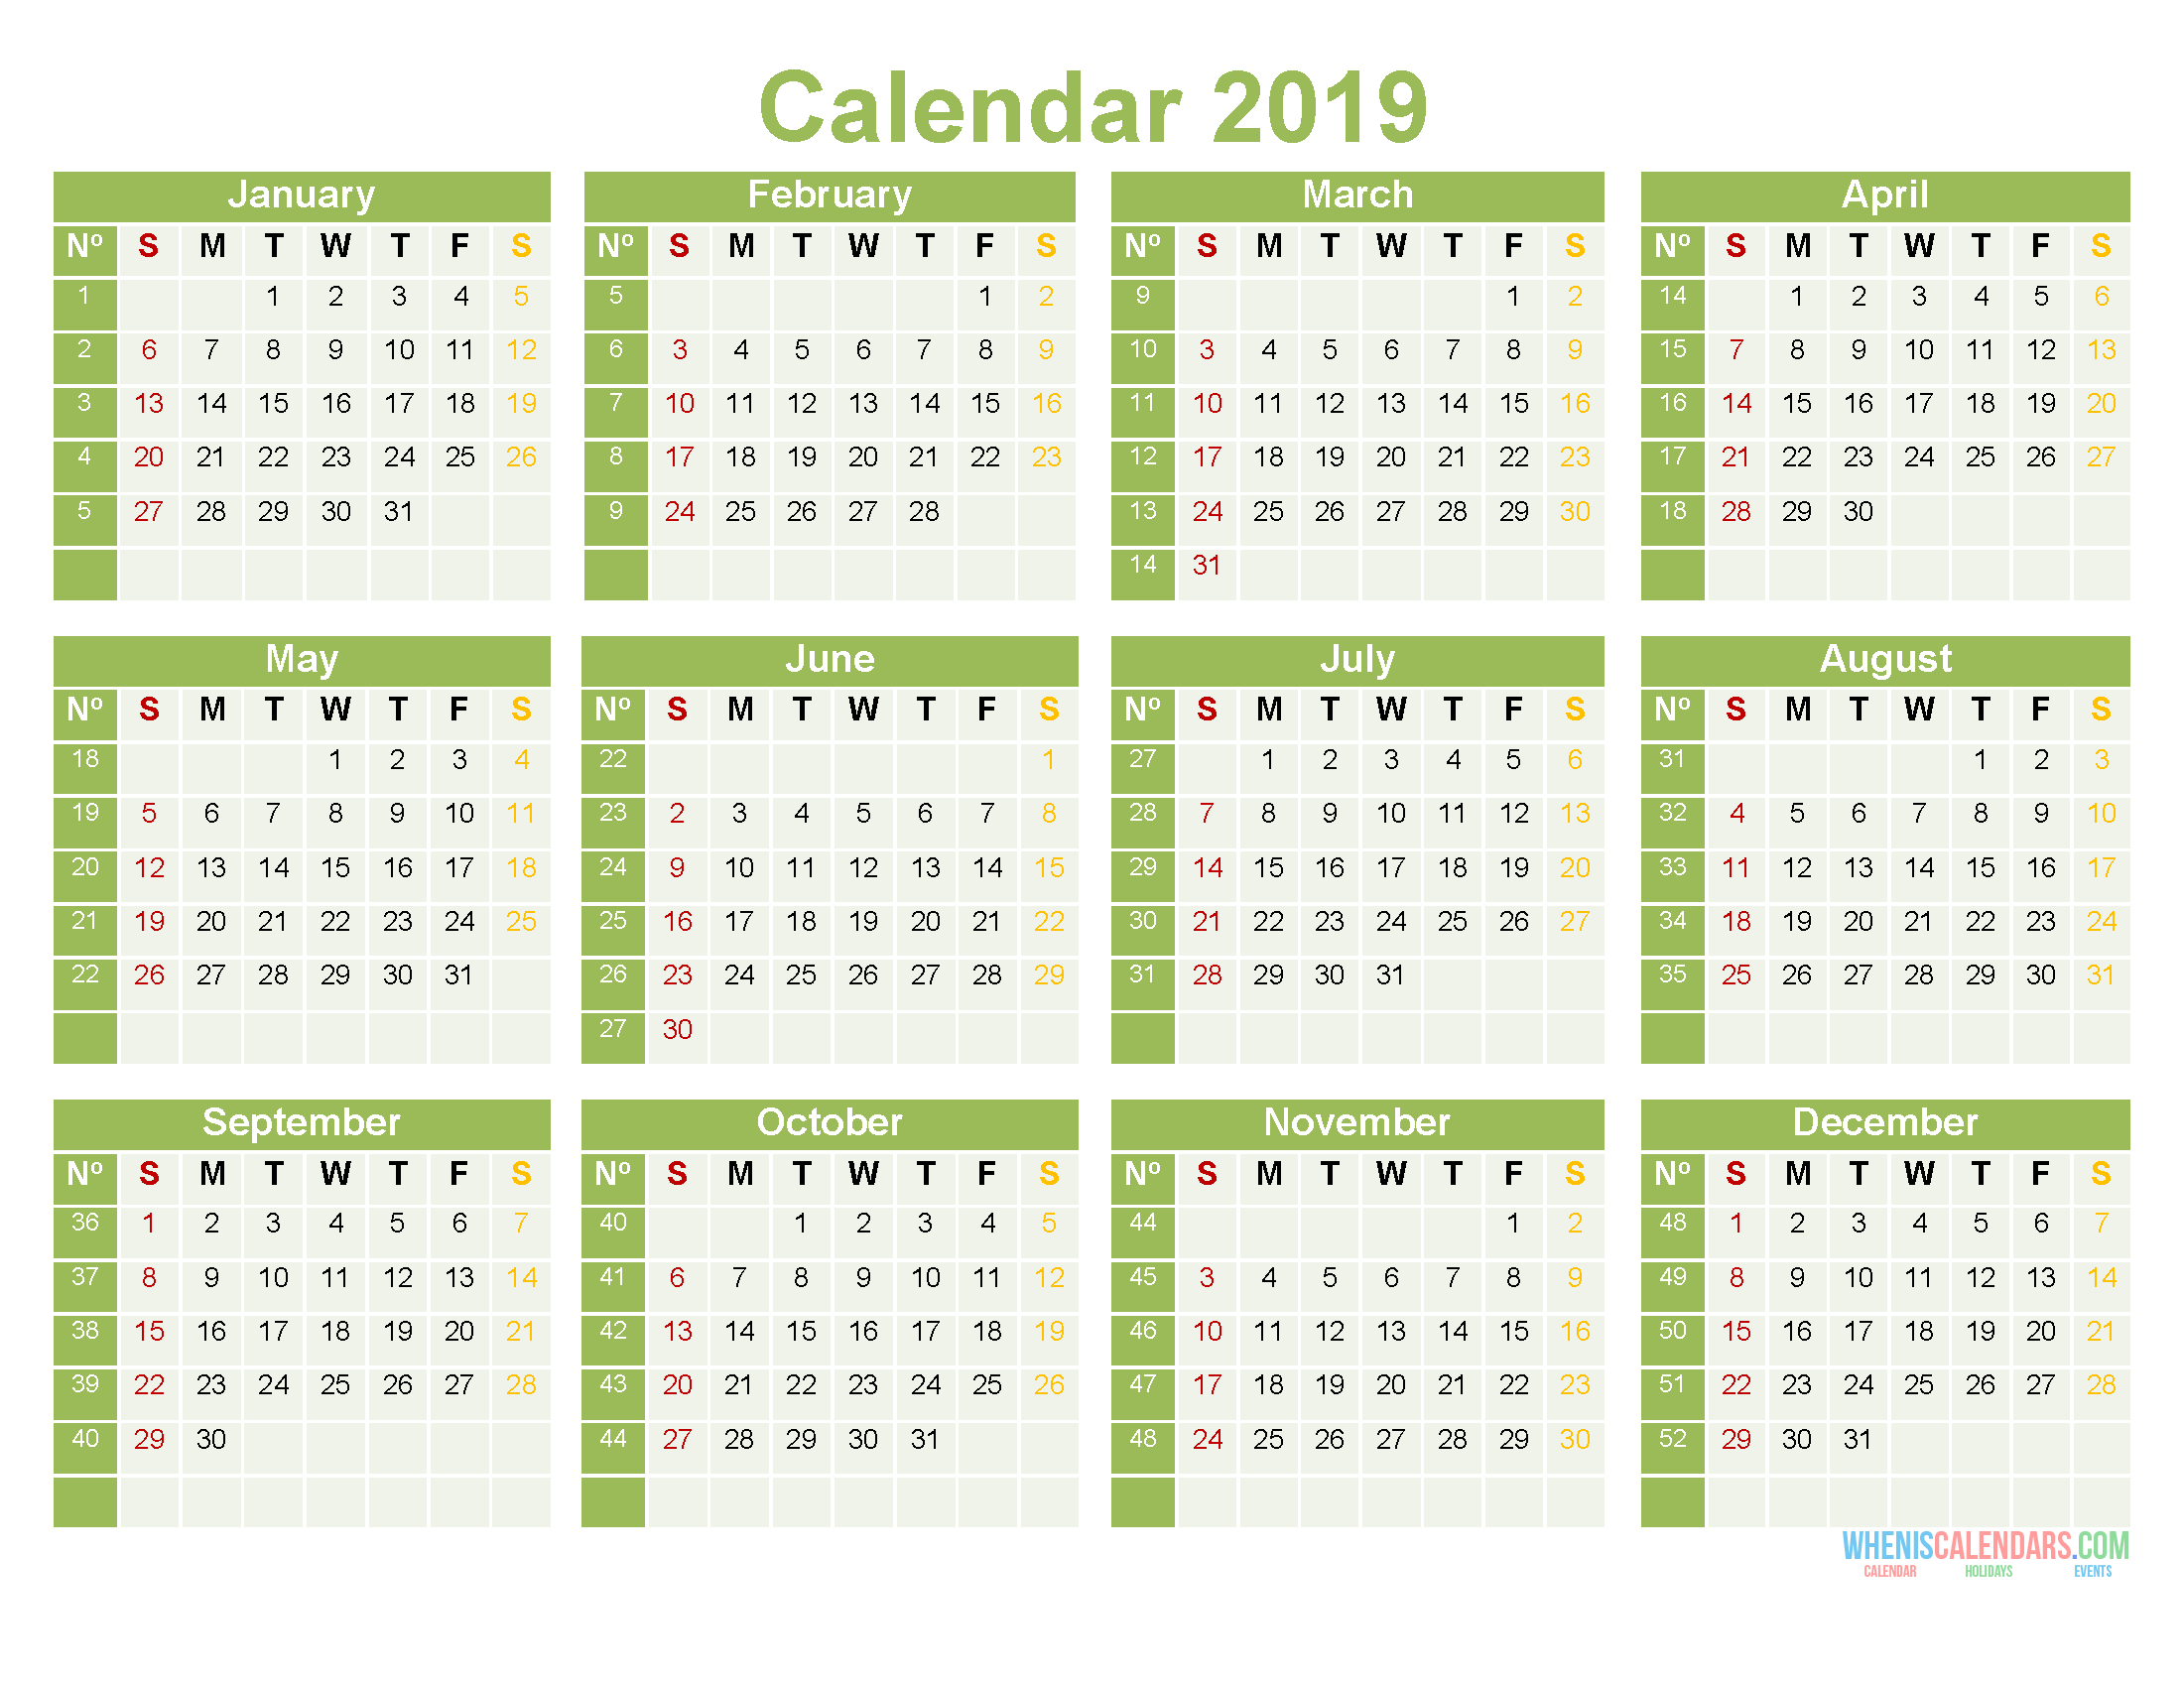 printable-yearly-calendar-2019-12-month-on-1-page-word-pdf-us-edition